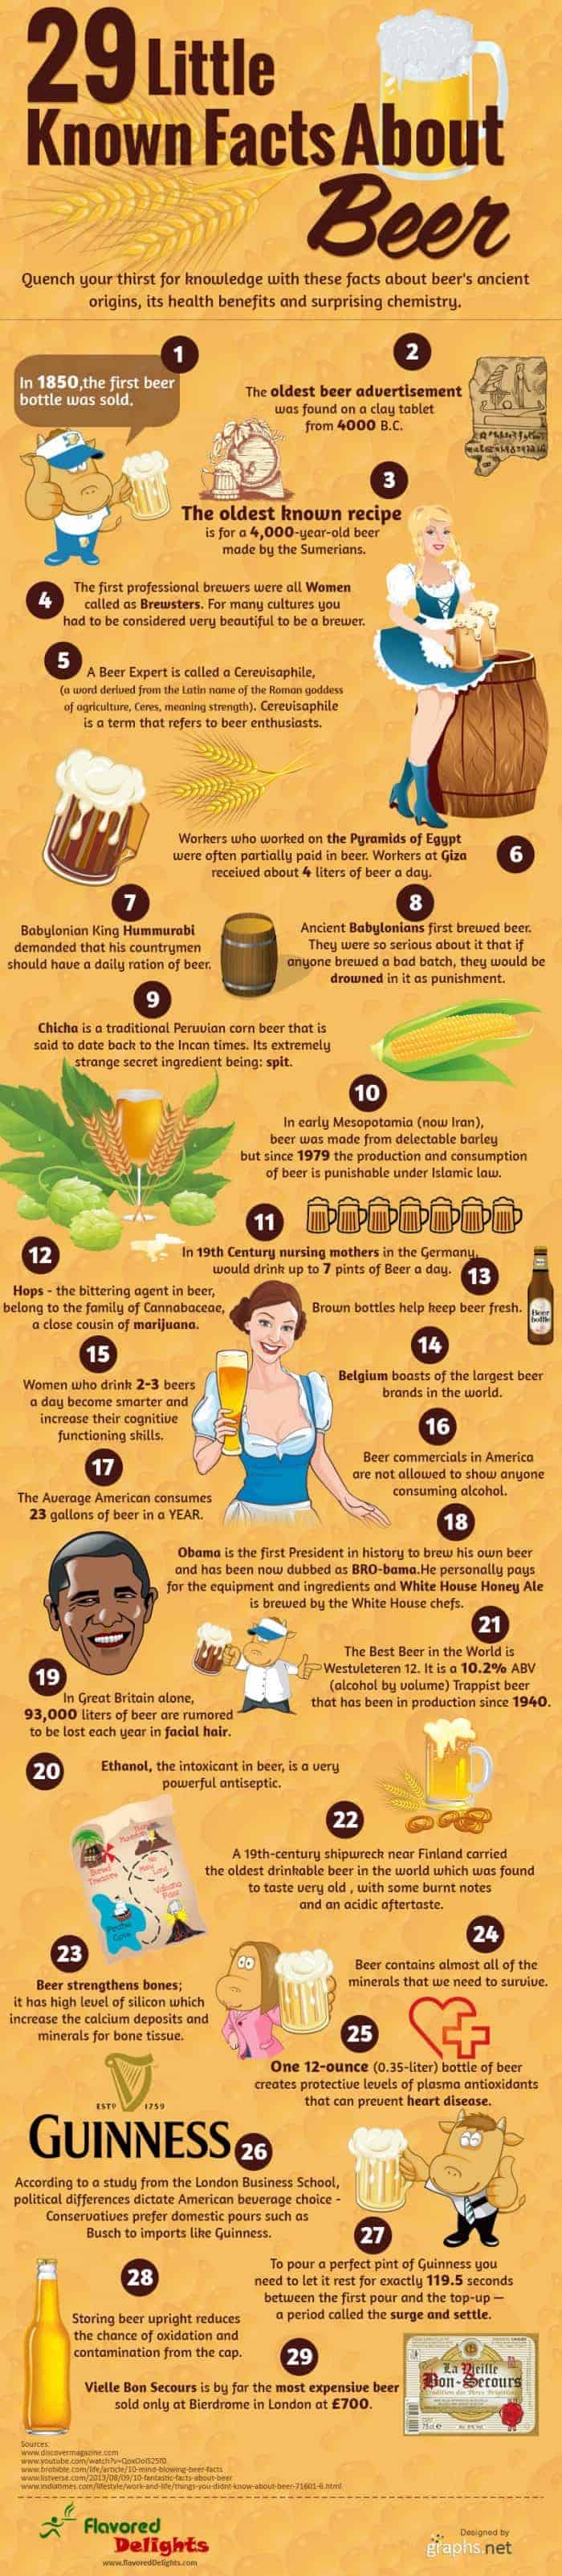 29 Little Known Facts About Beer